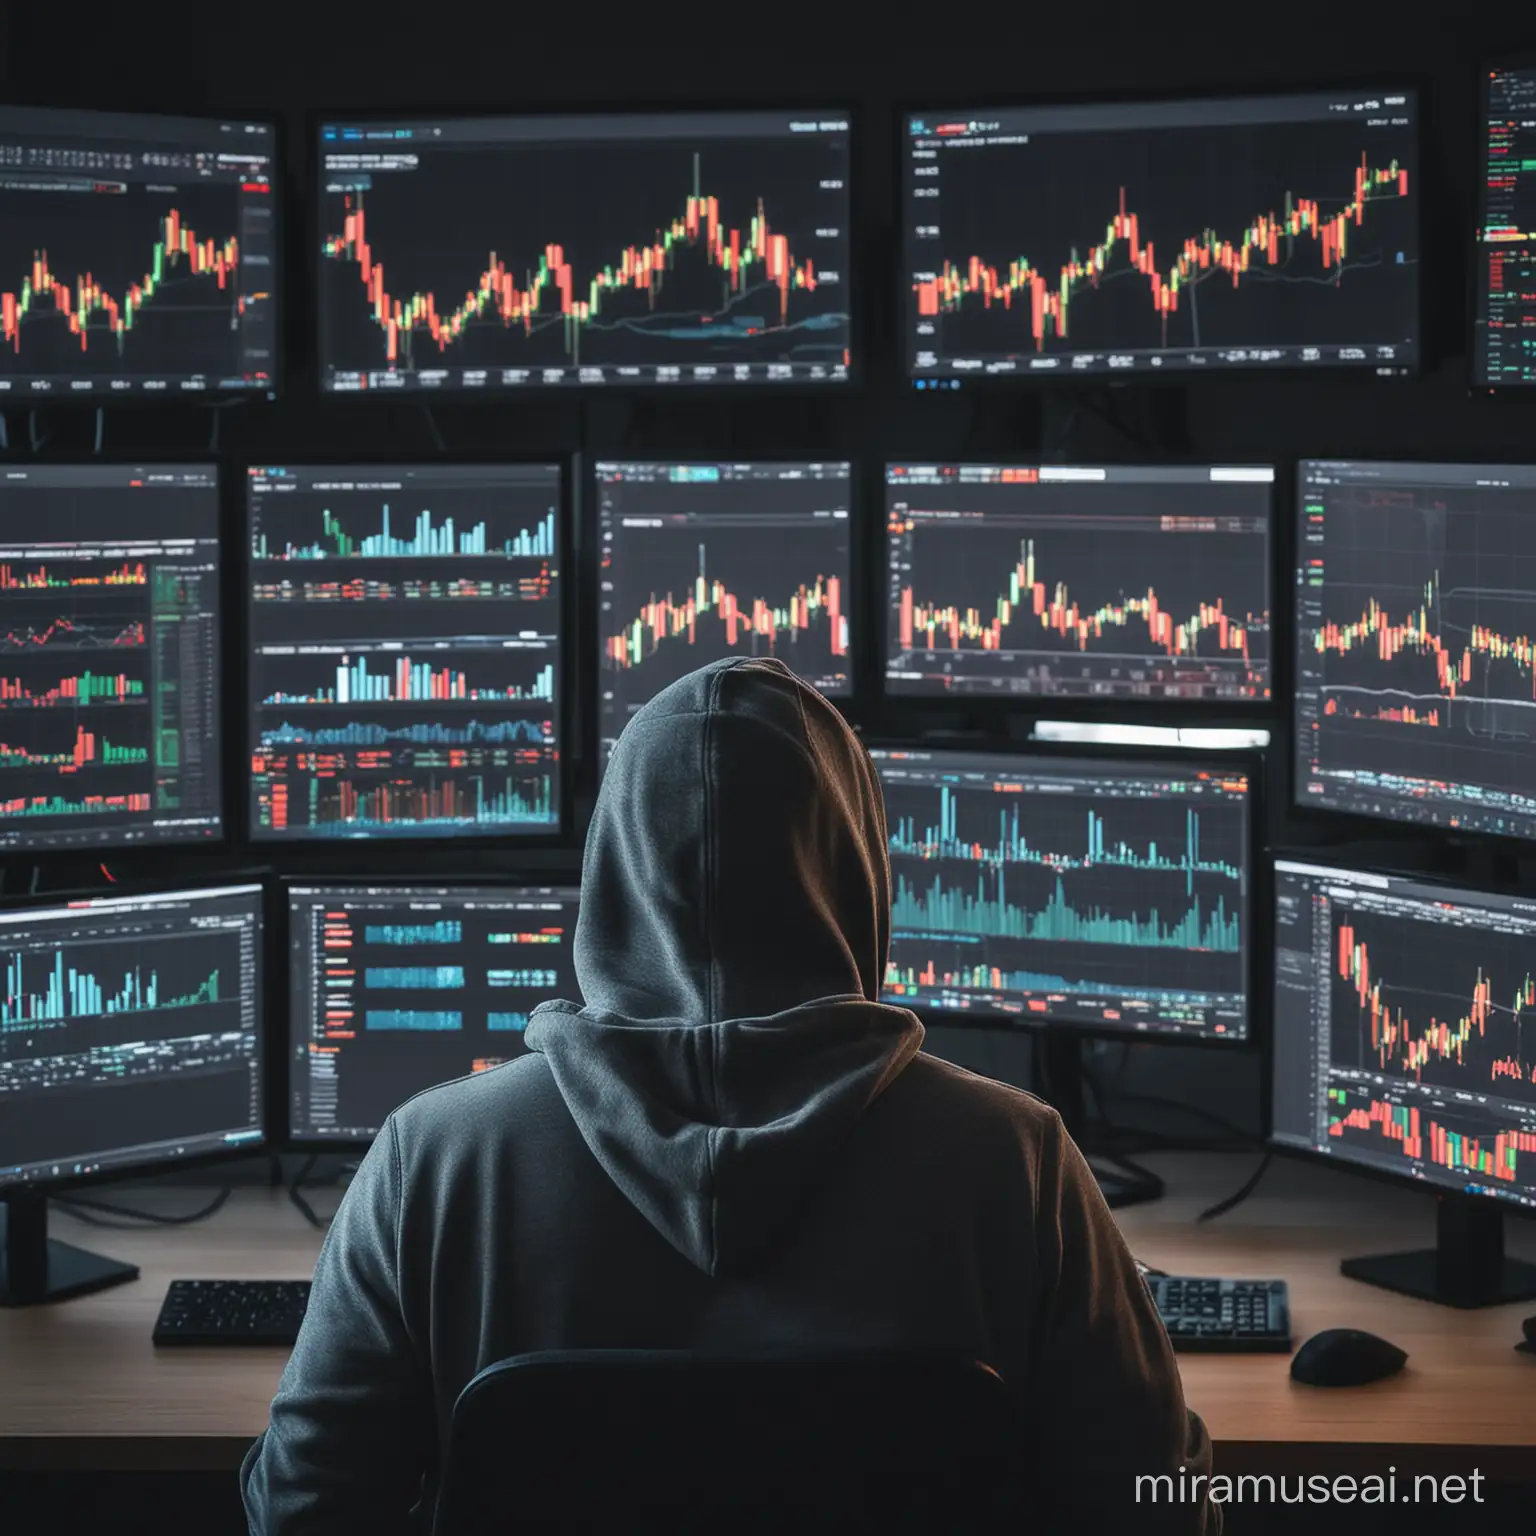 Trader in Hoodie Analyzing Stock Charts on Dual Monitors in Dimly Lit Room